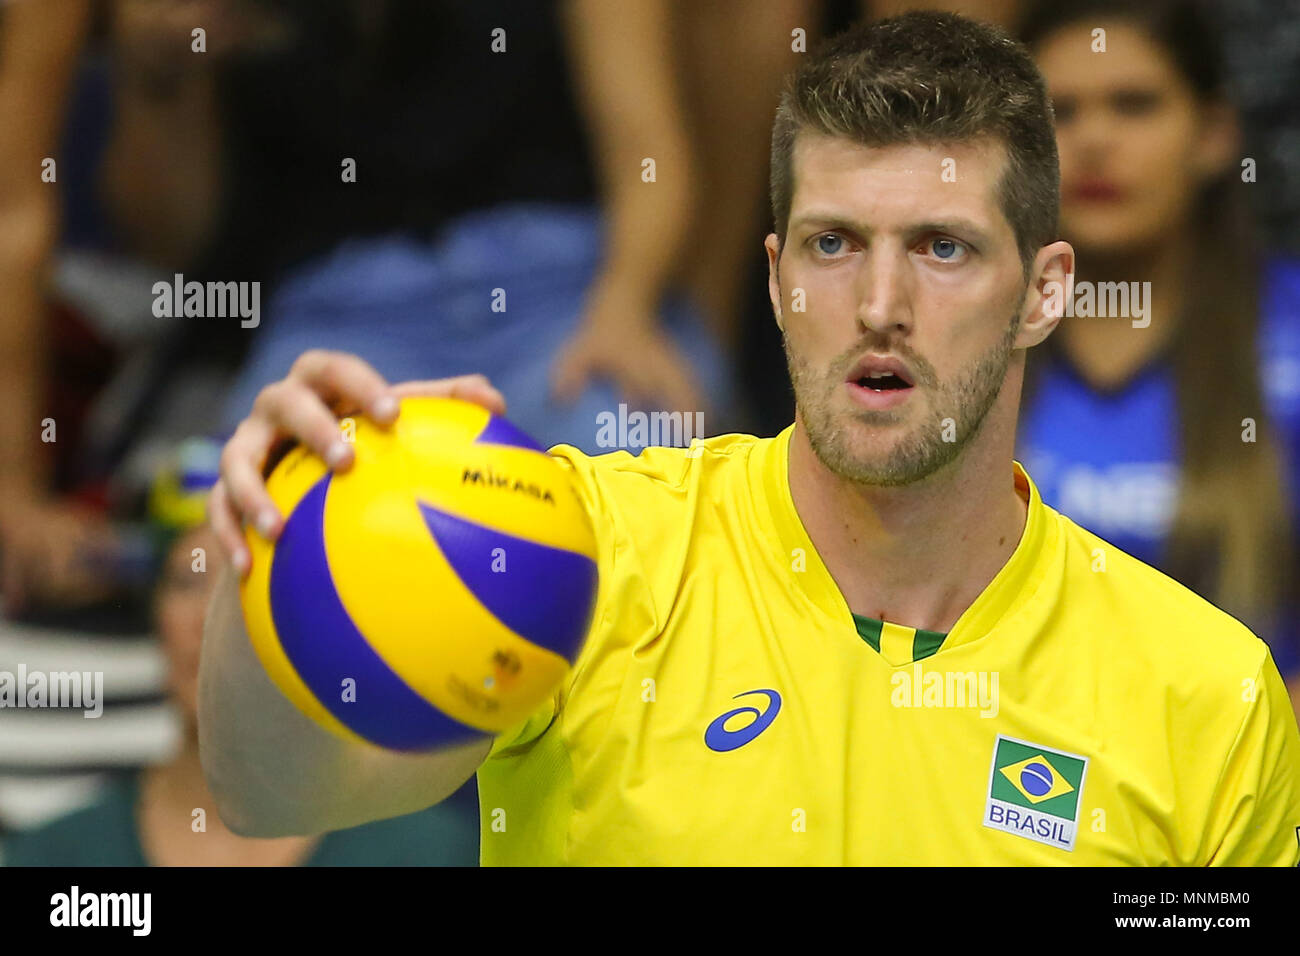 TAUBATÉ, SP - 17.05.2018: BRASIL X CHINA - Eder during the friendly game of volleyball between Brazil and China held at the Abaeté Gymnasium in Taubaté in São Paulo (SP). (Photo: Jales Valquer/Fotoarena) Stock Photo